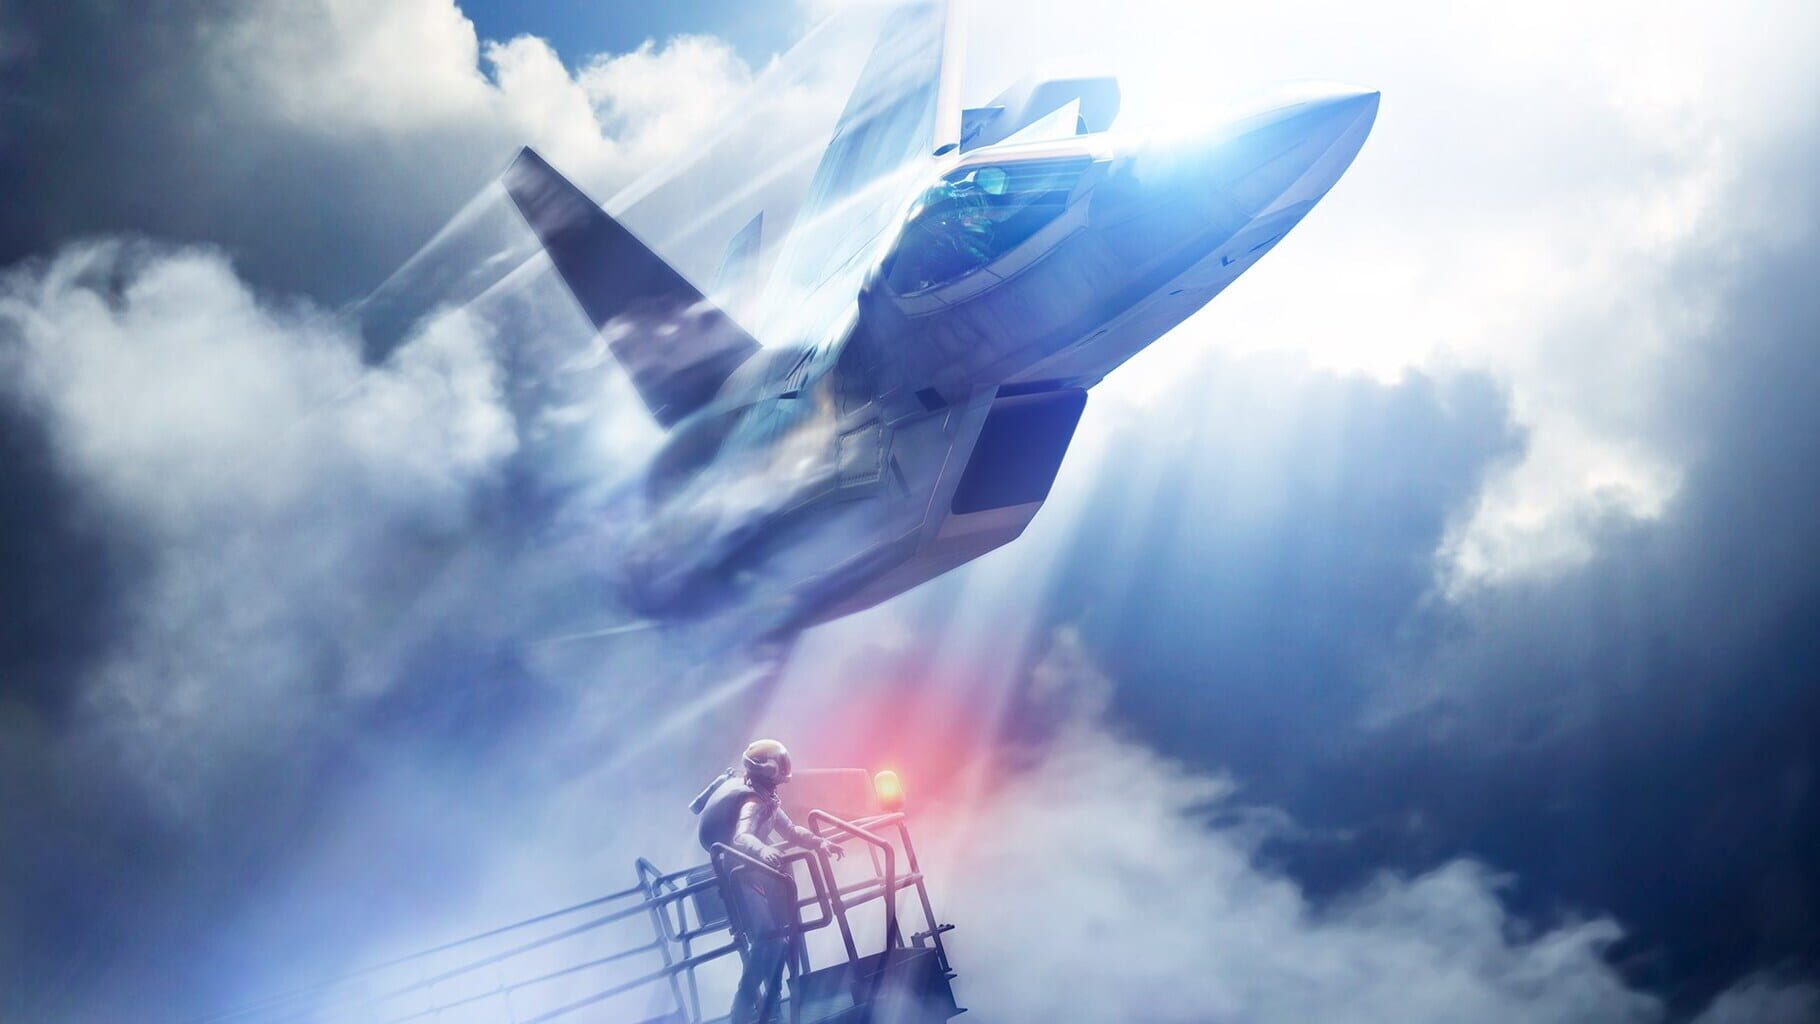 Ace Combat 7: Skies Unknown - Deluxe Edition Image